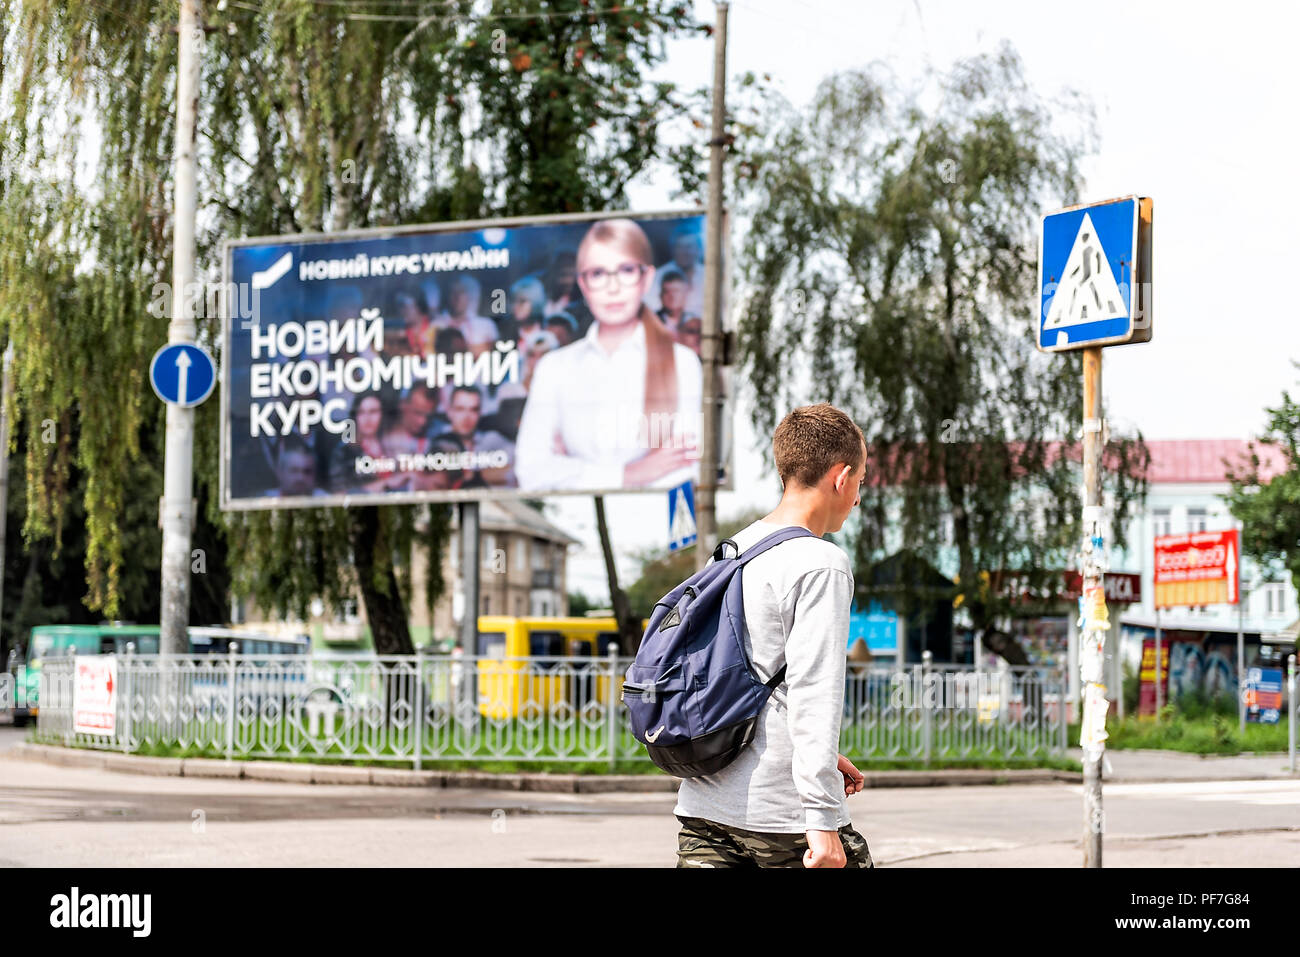 Rivne, Ukraine - July 28, 2018: Young Ukrainian man walking in front of political advertisement ad banner sign, Yulia Tymoshenko for president by stre Stock Photo